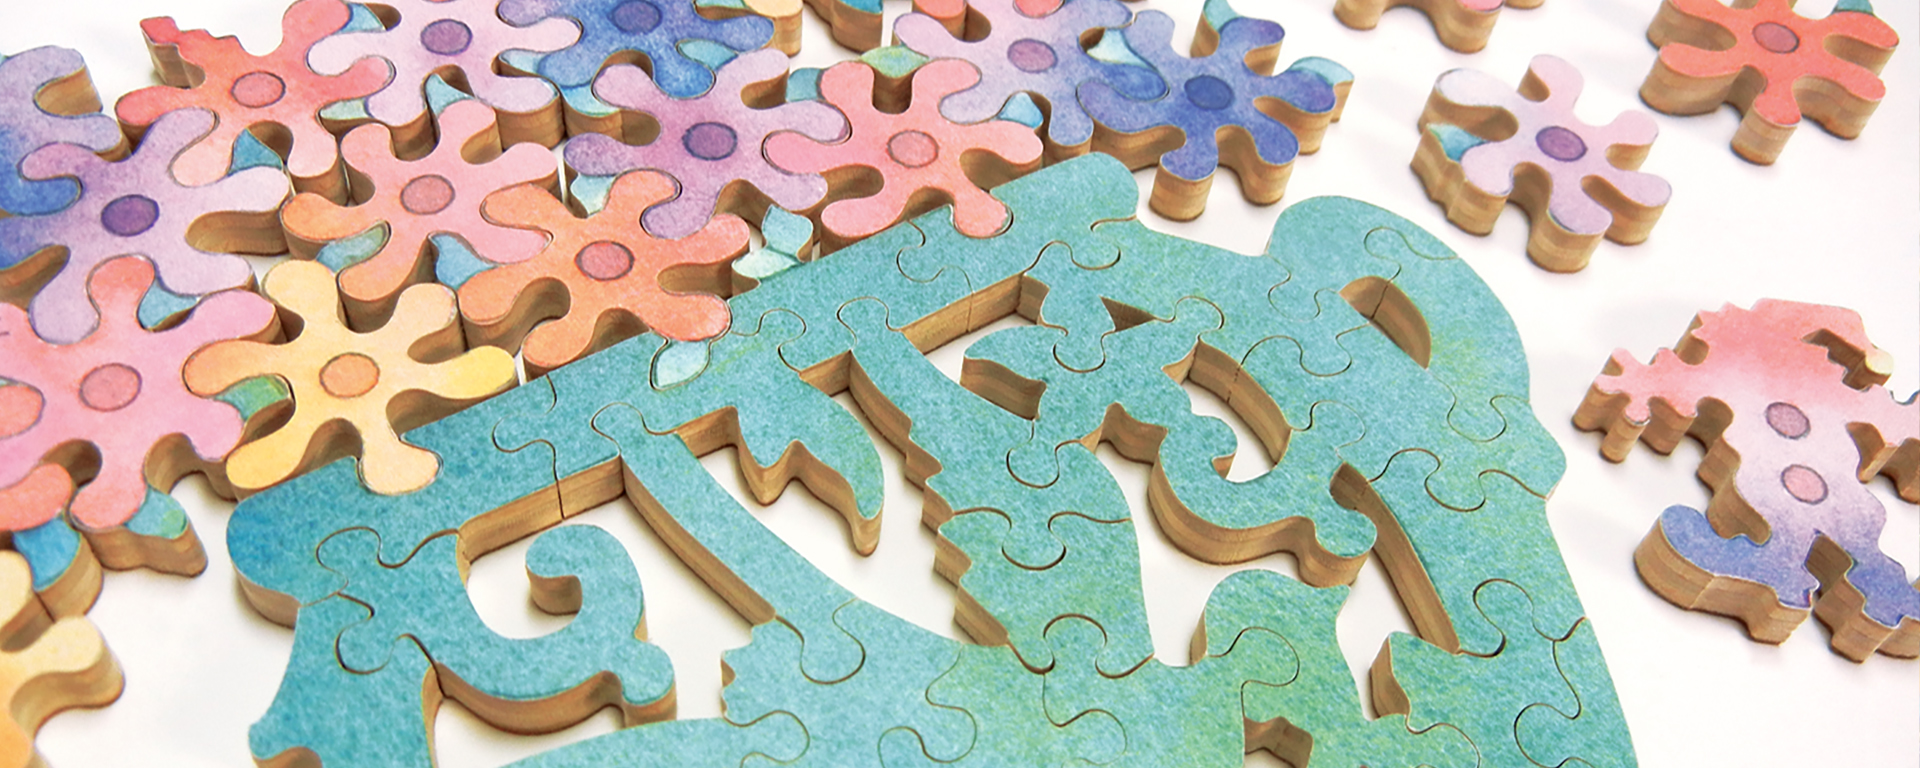 Wooden teaser bouquet jigsaw puzzle featuring a teal vase and a variety of different colored posies. The interior Teaser pieces nestle together, while still leaving some empty space between each piece.